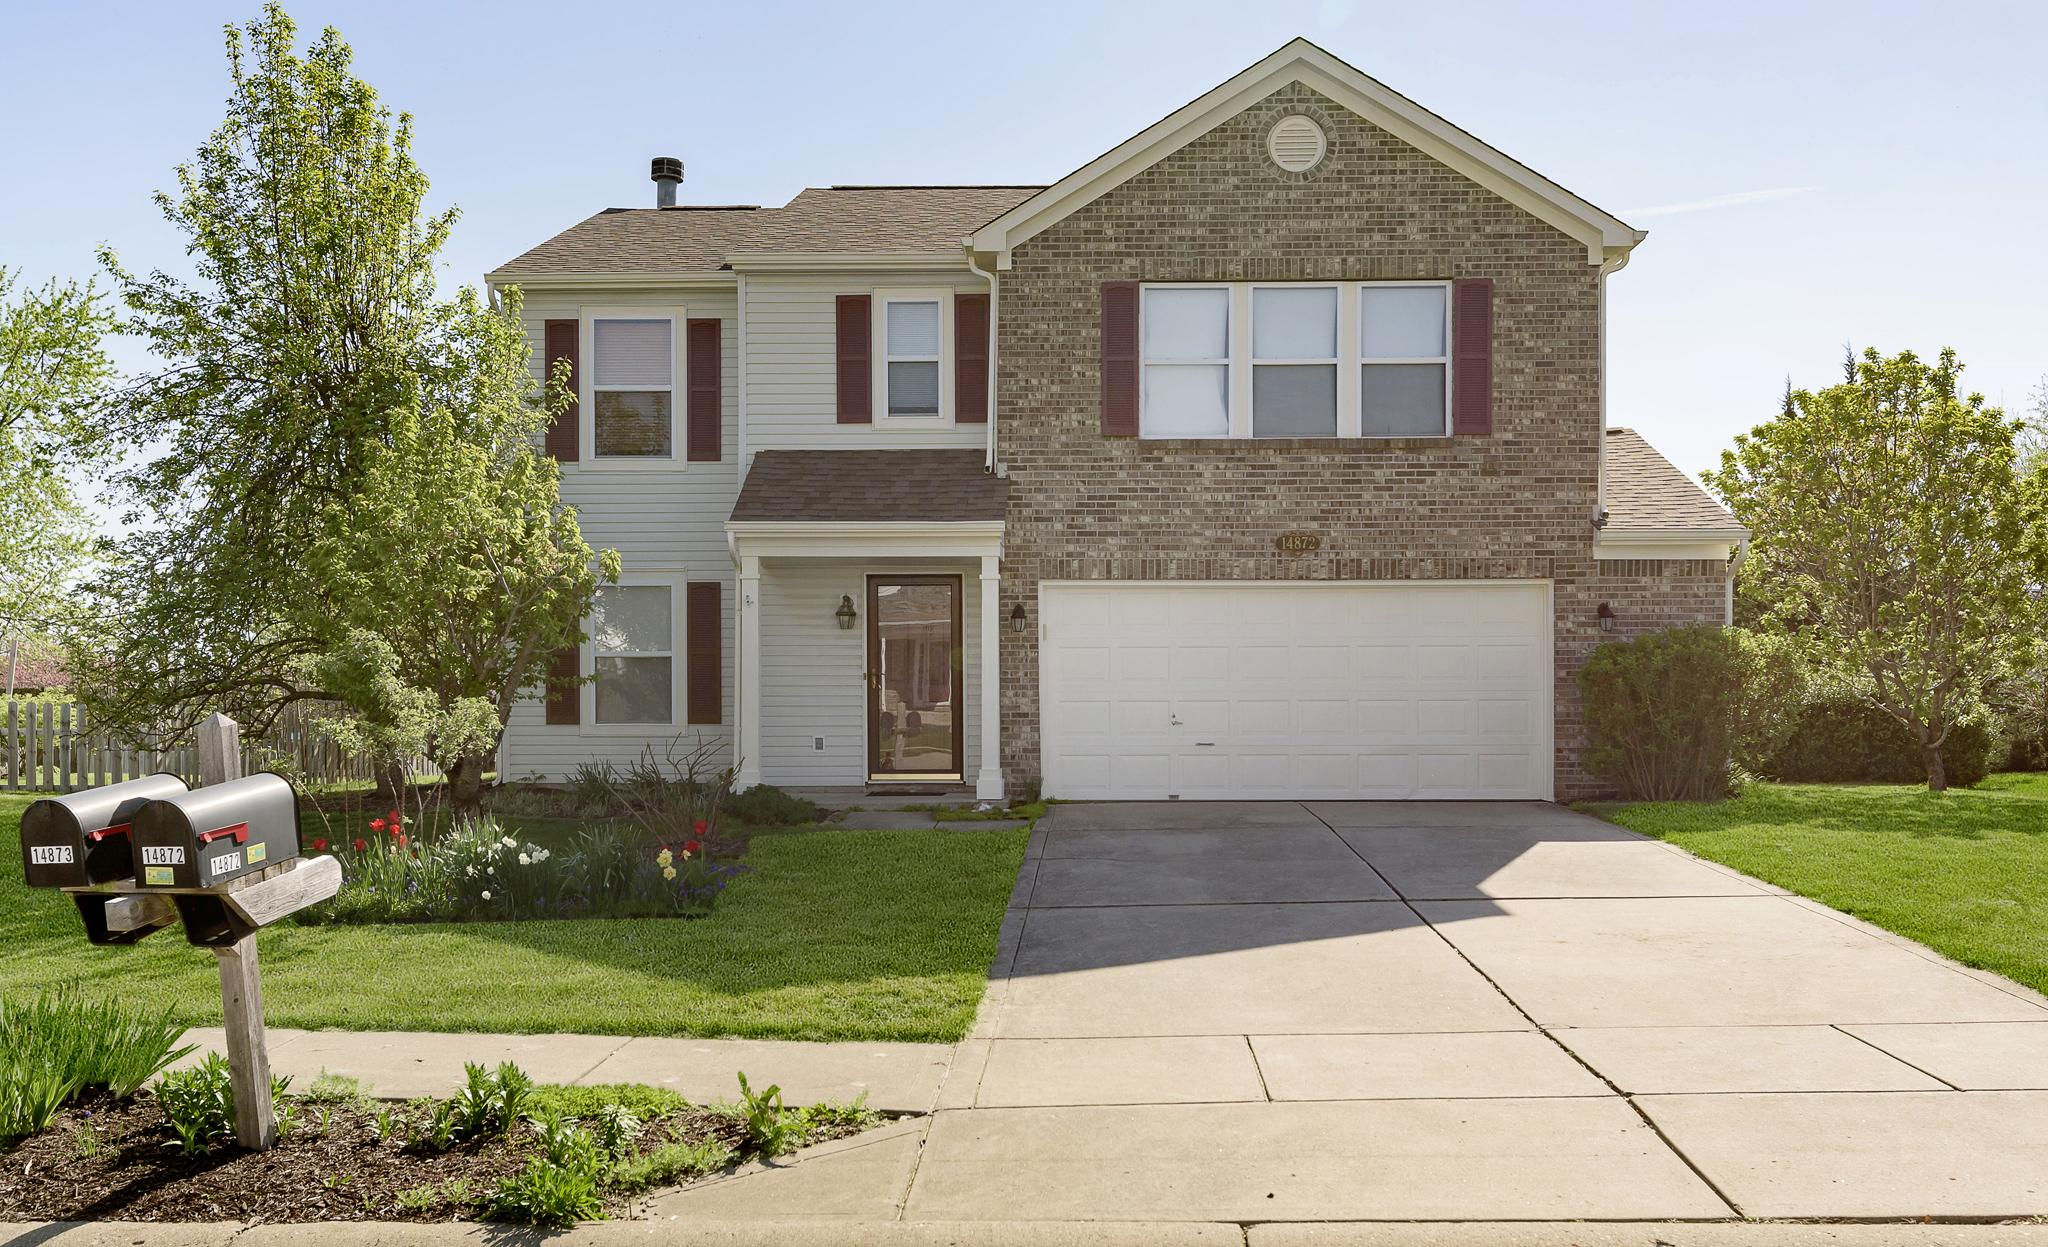 Photo one of 14872 Drayton Dr Noblesville IN 46062 | MLS 21973893